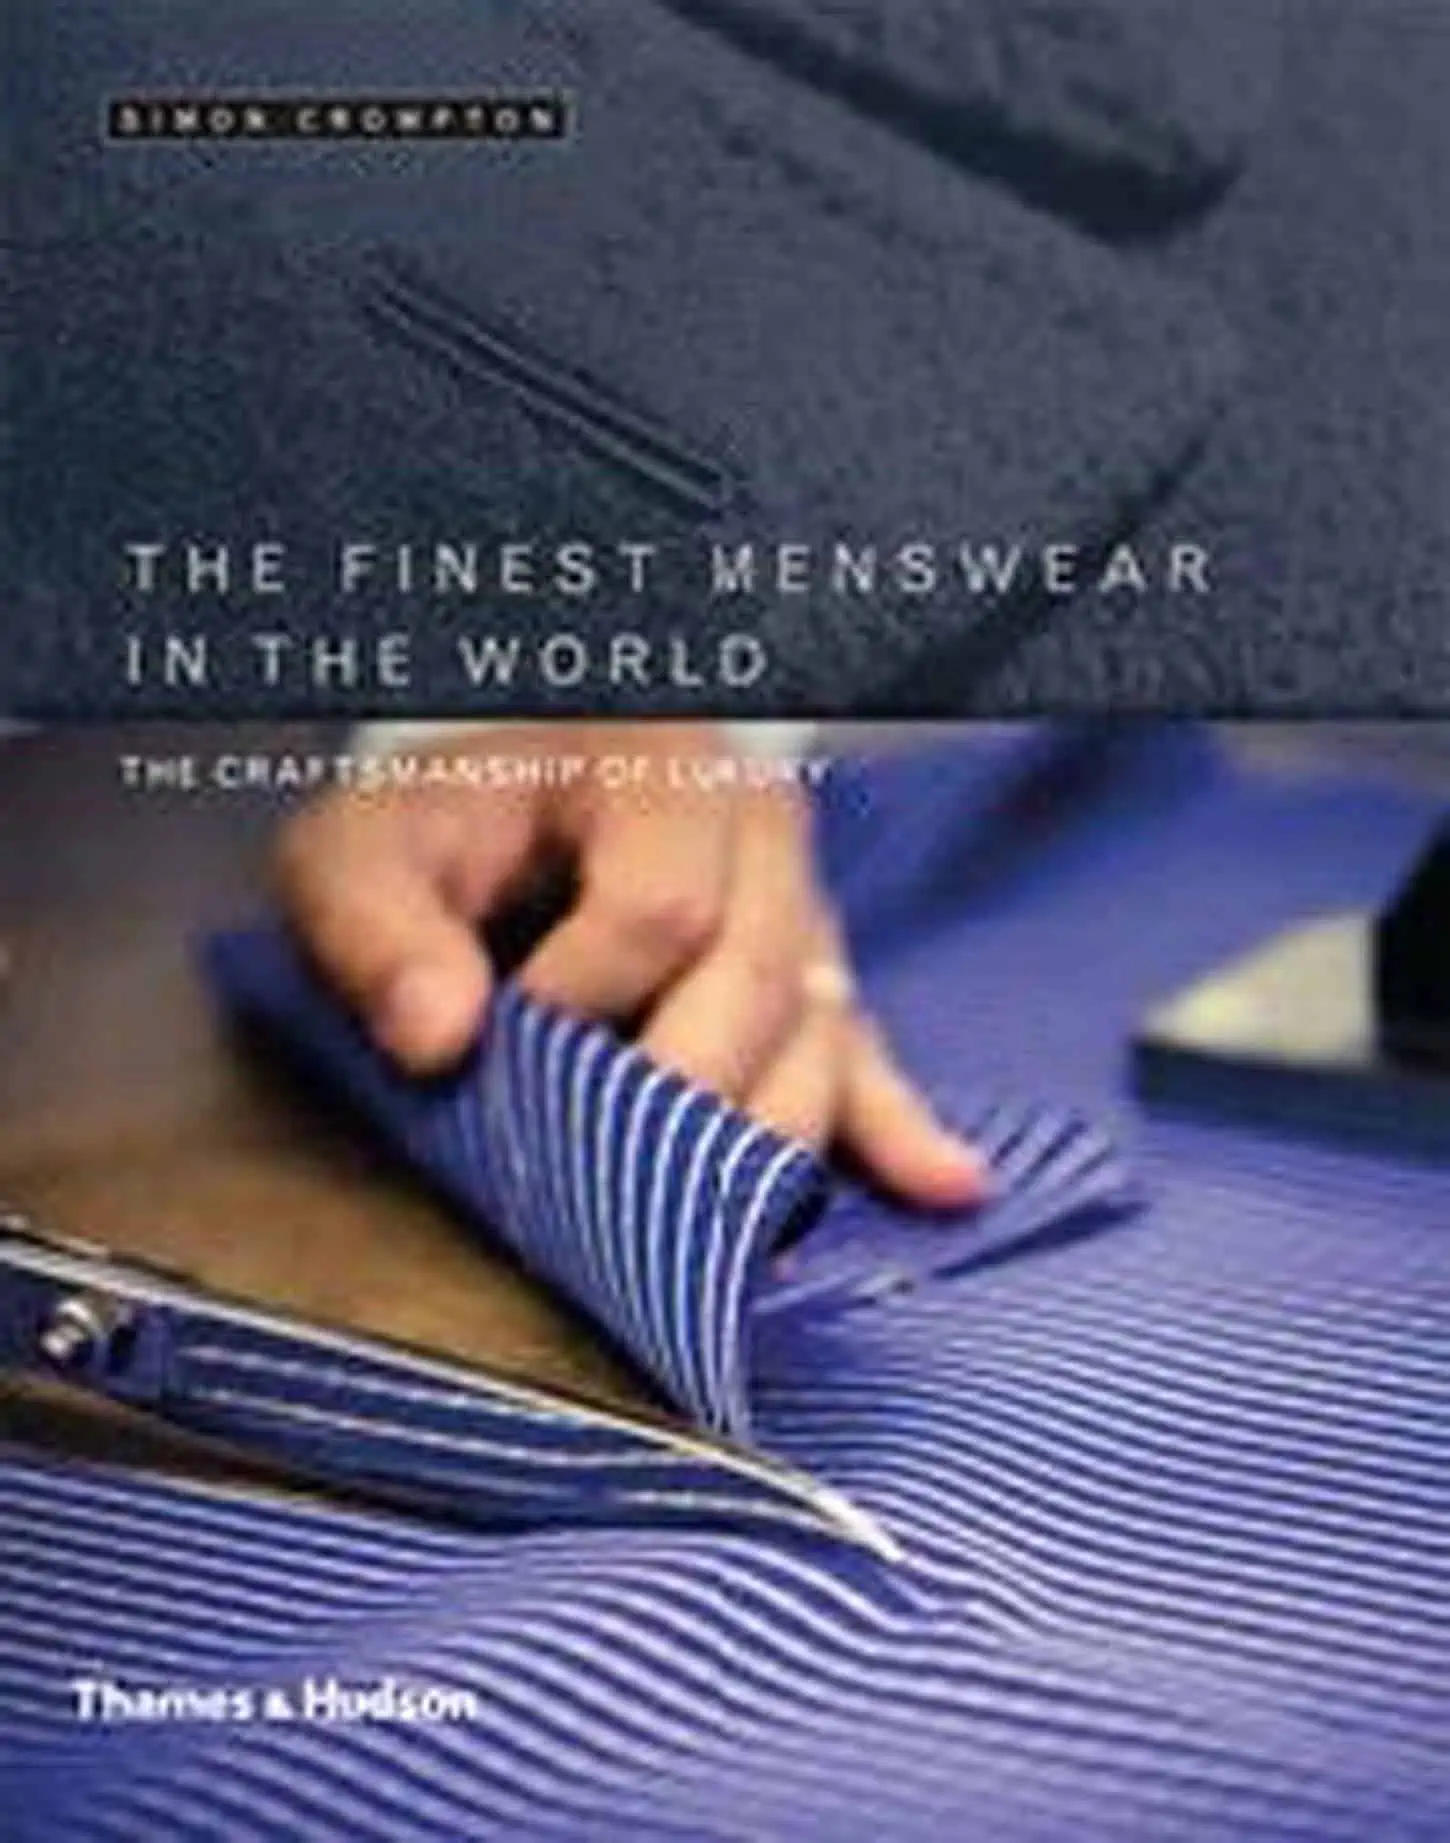 A photograph of the cover of the book The Finest Menswear in the World by Simon Crompton